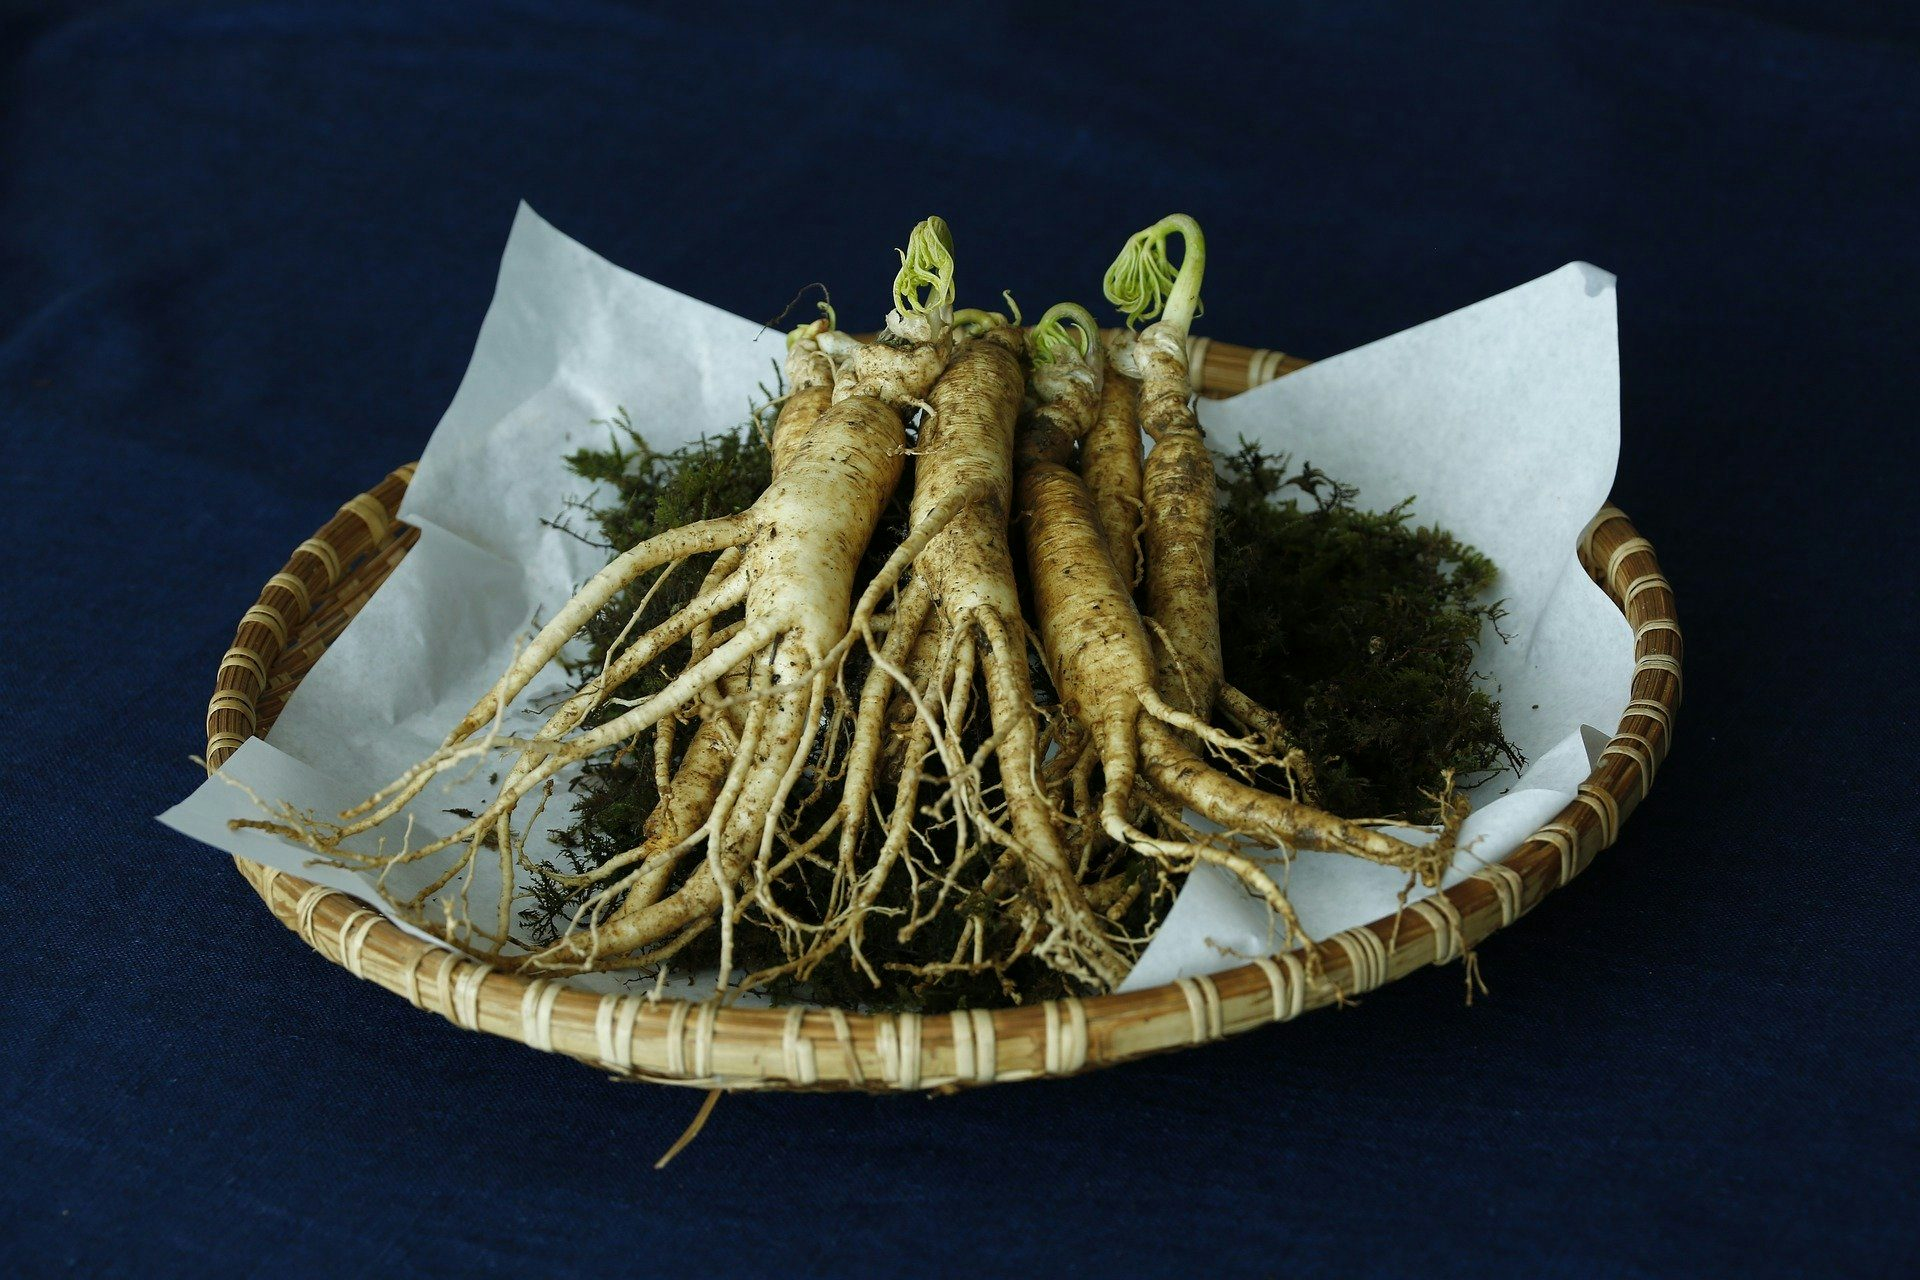 Ginseng extract extraction